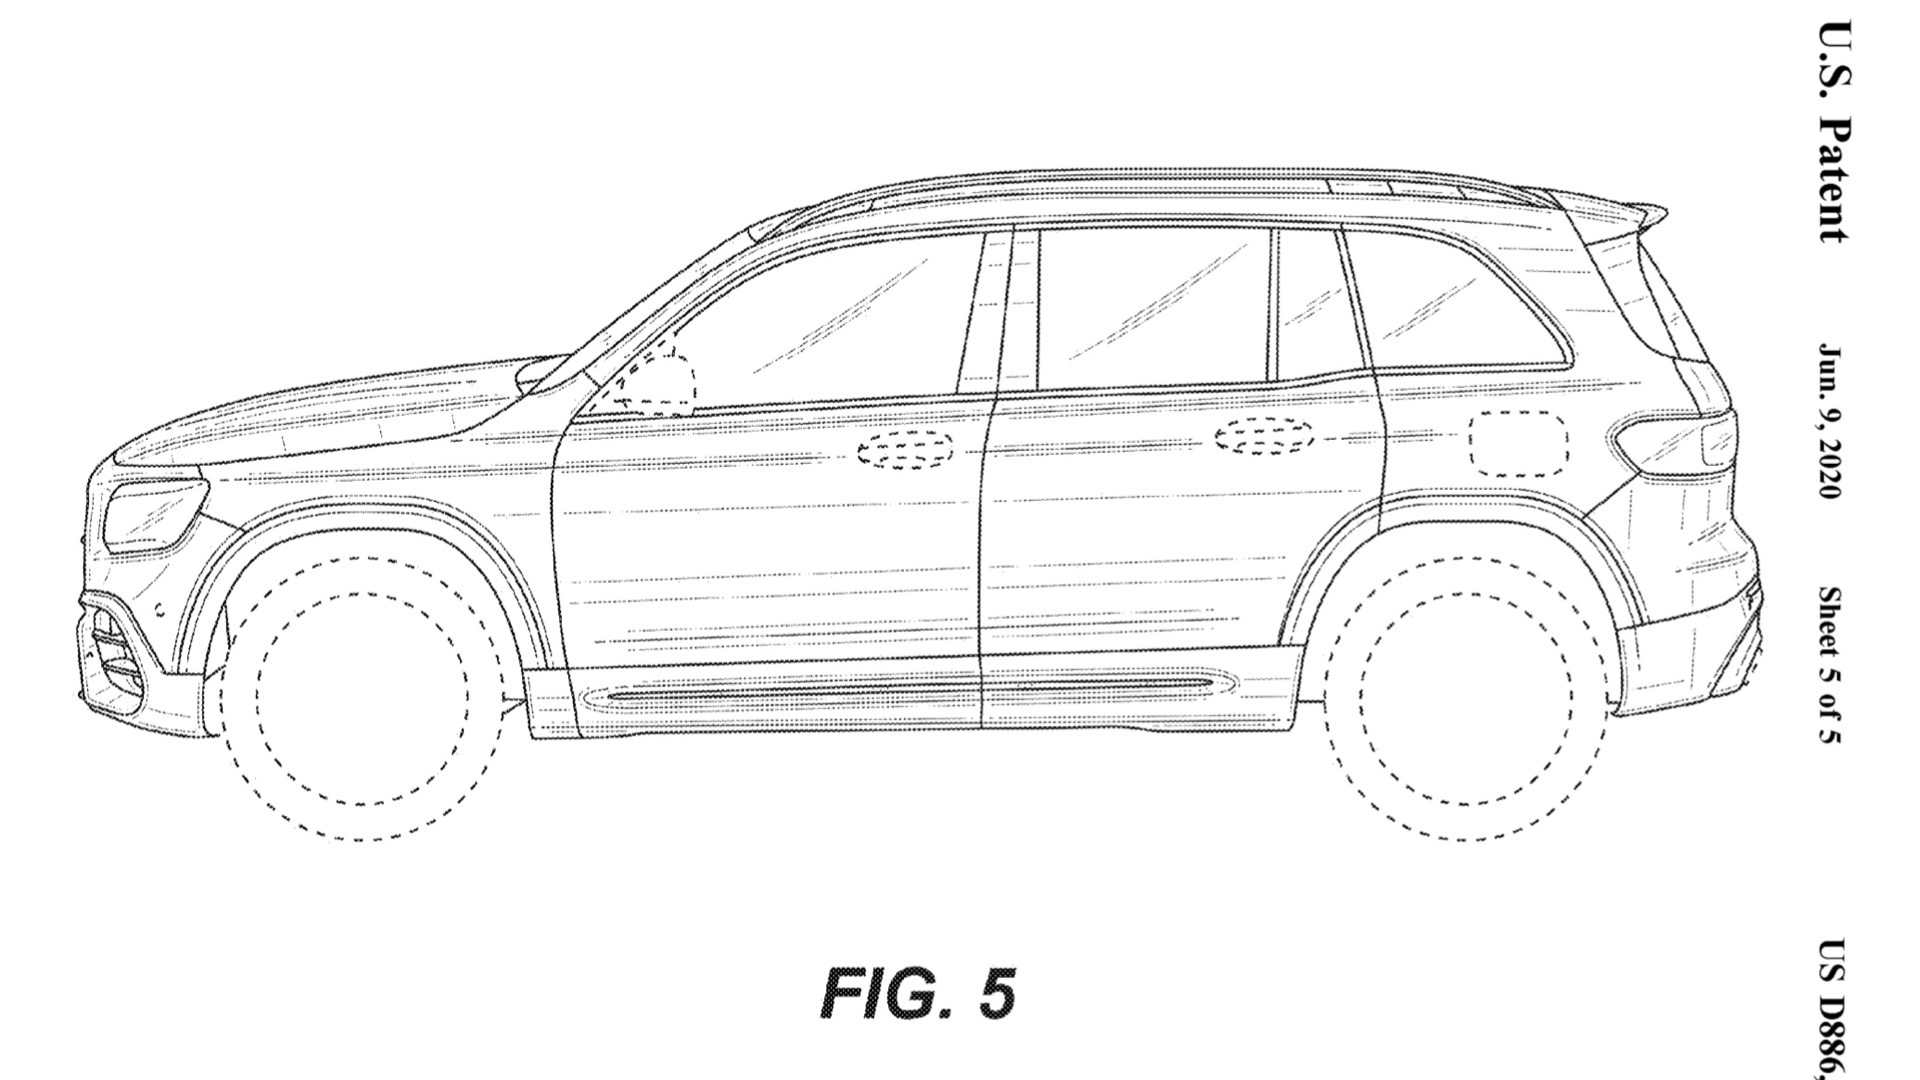 Likely 2021 Mercedes-AMG GLB 45 shown in patent filing